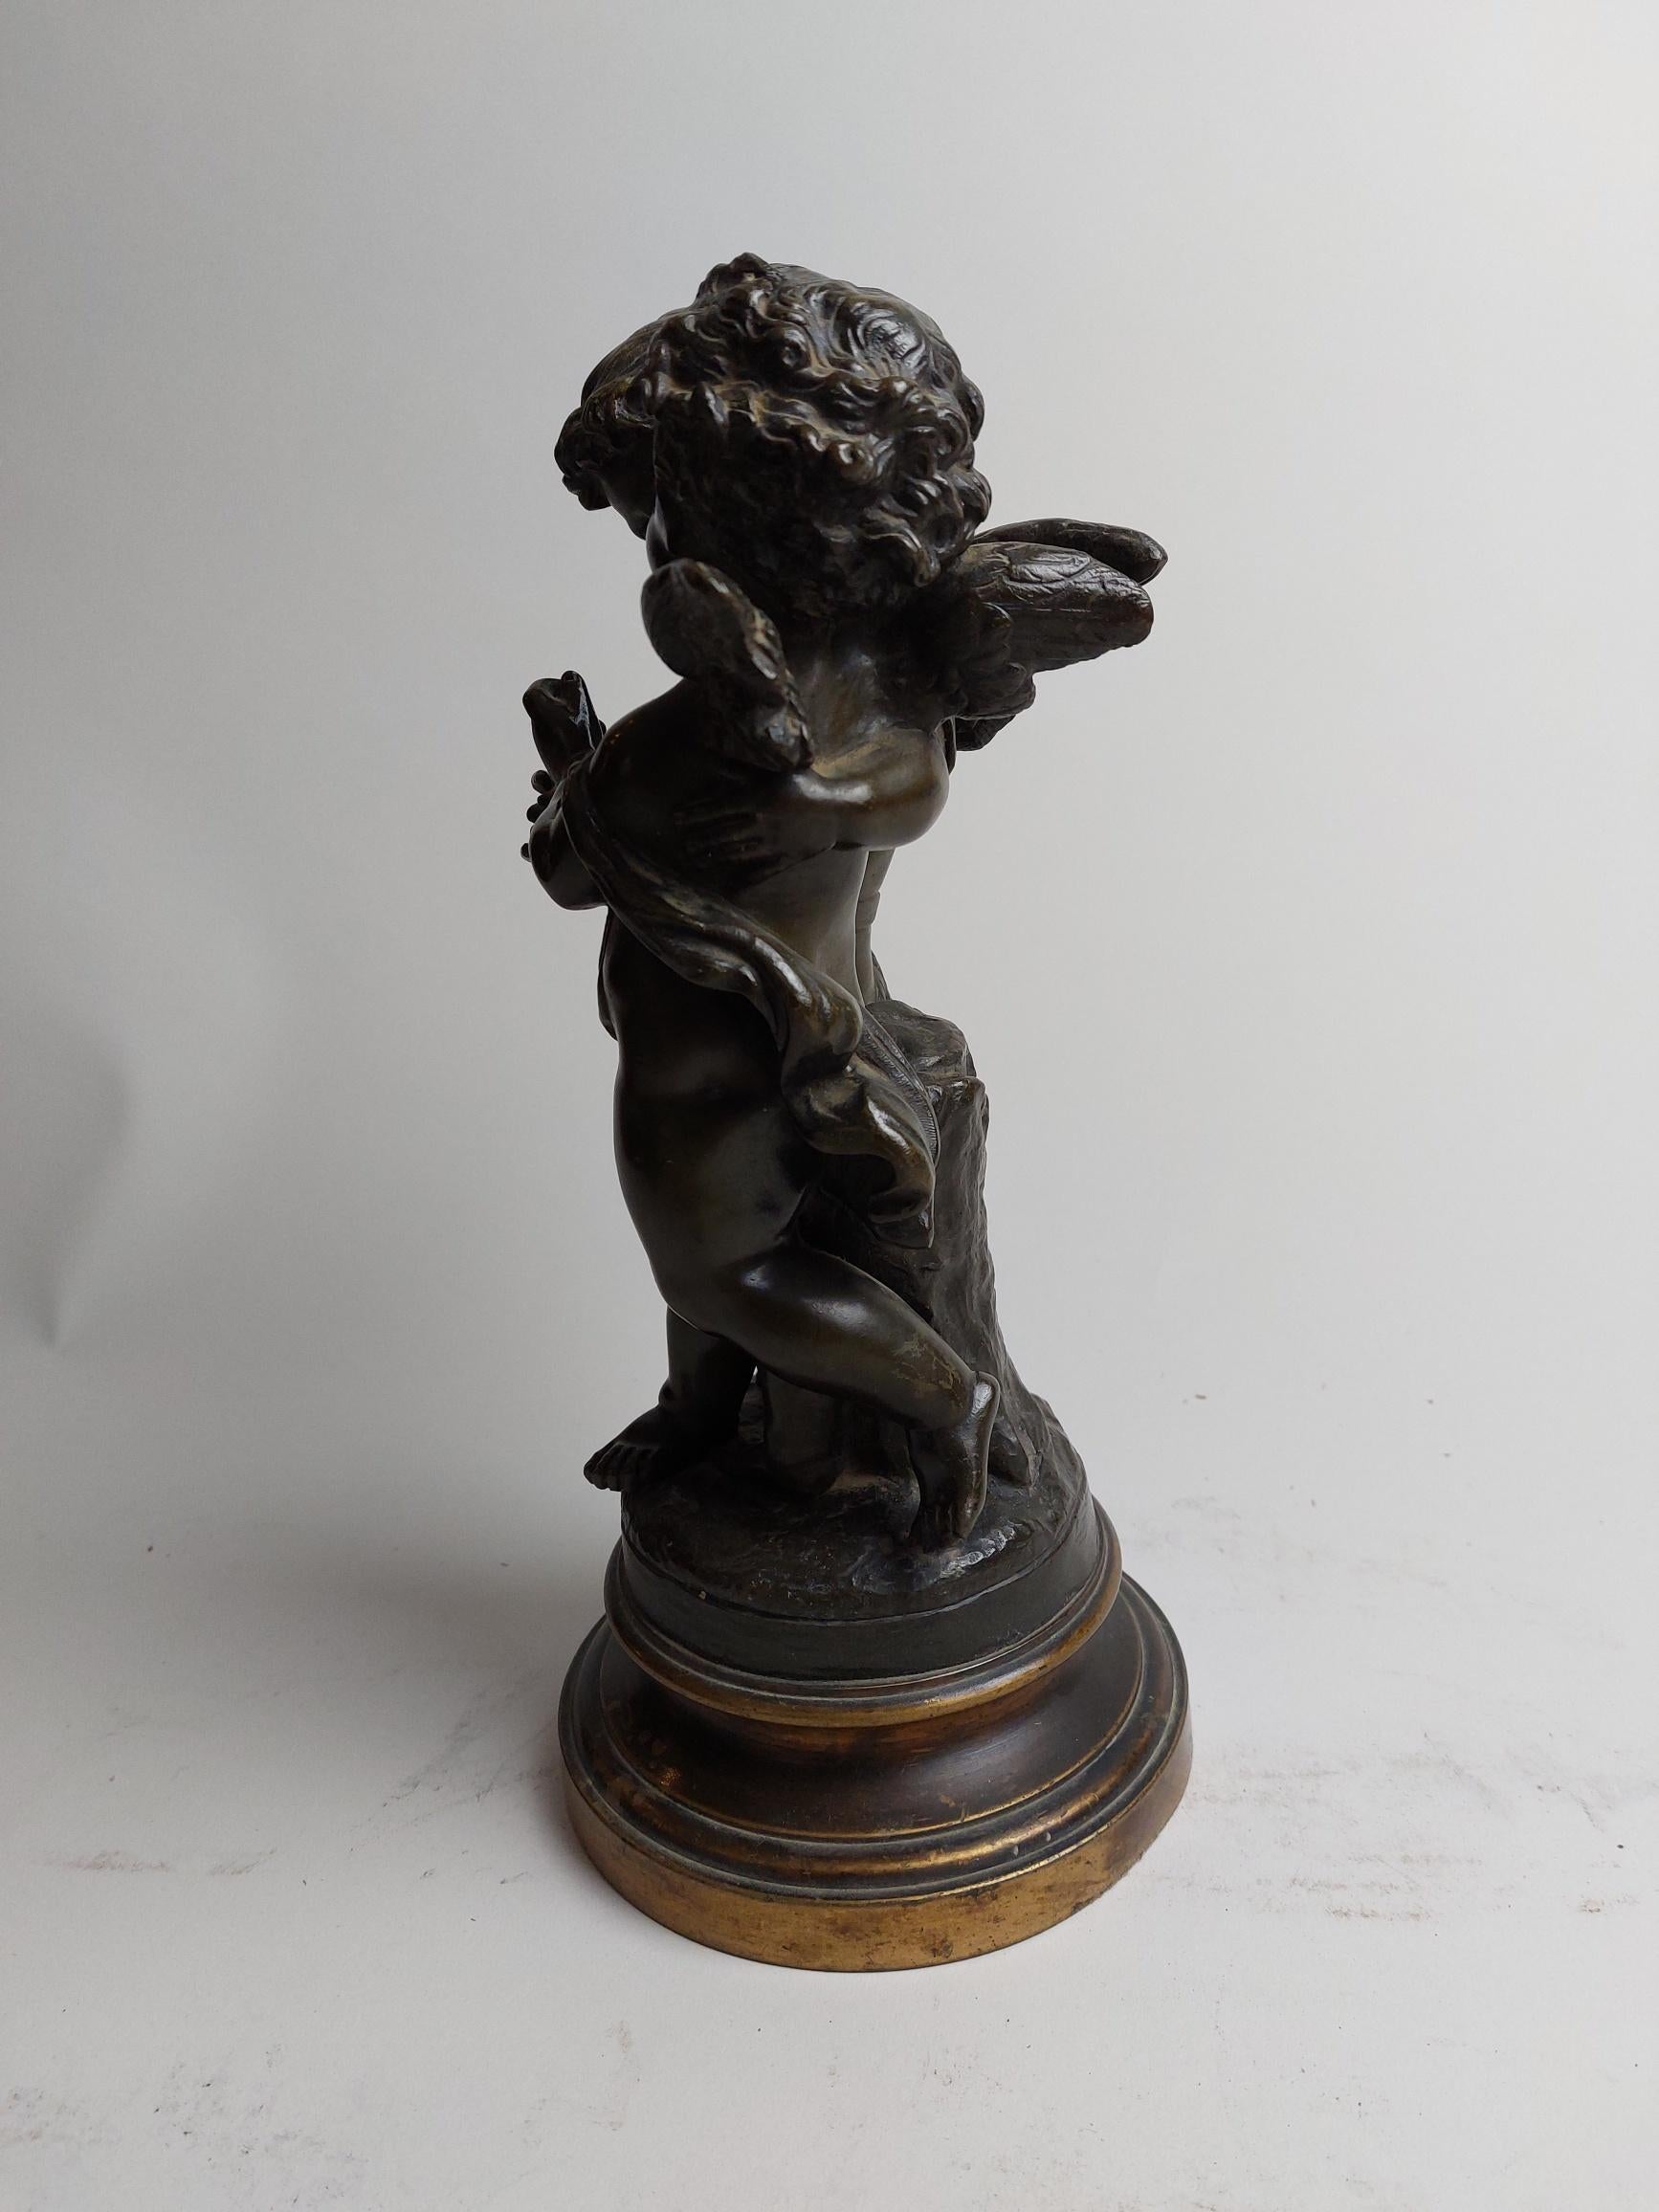 A charming 19th century bronze of boy and girl winged cherubs (putti) embracing each other as they walk along deep in conversation. On a brass base.
Signed Bulio.